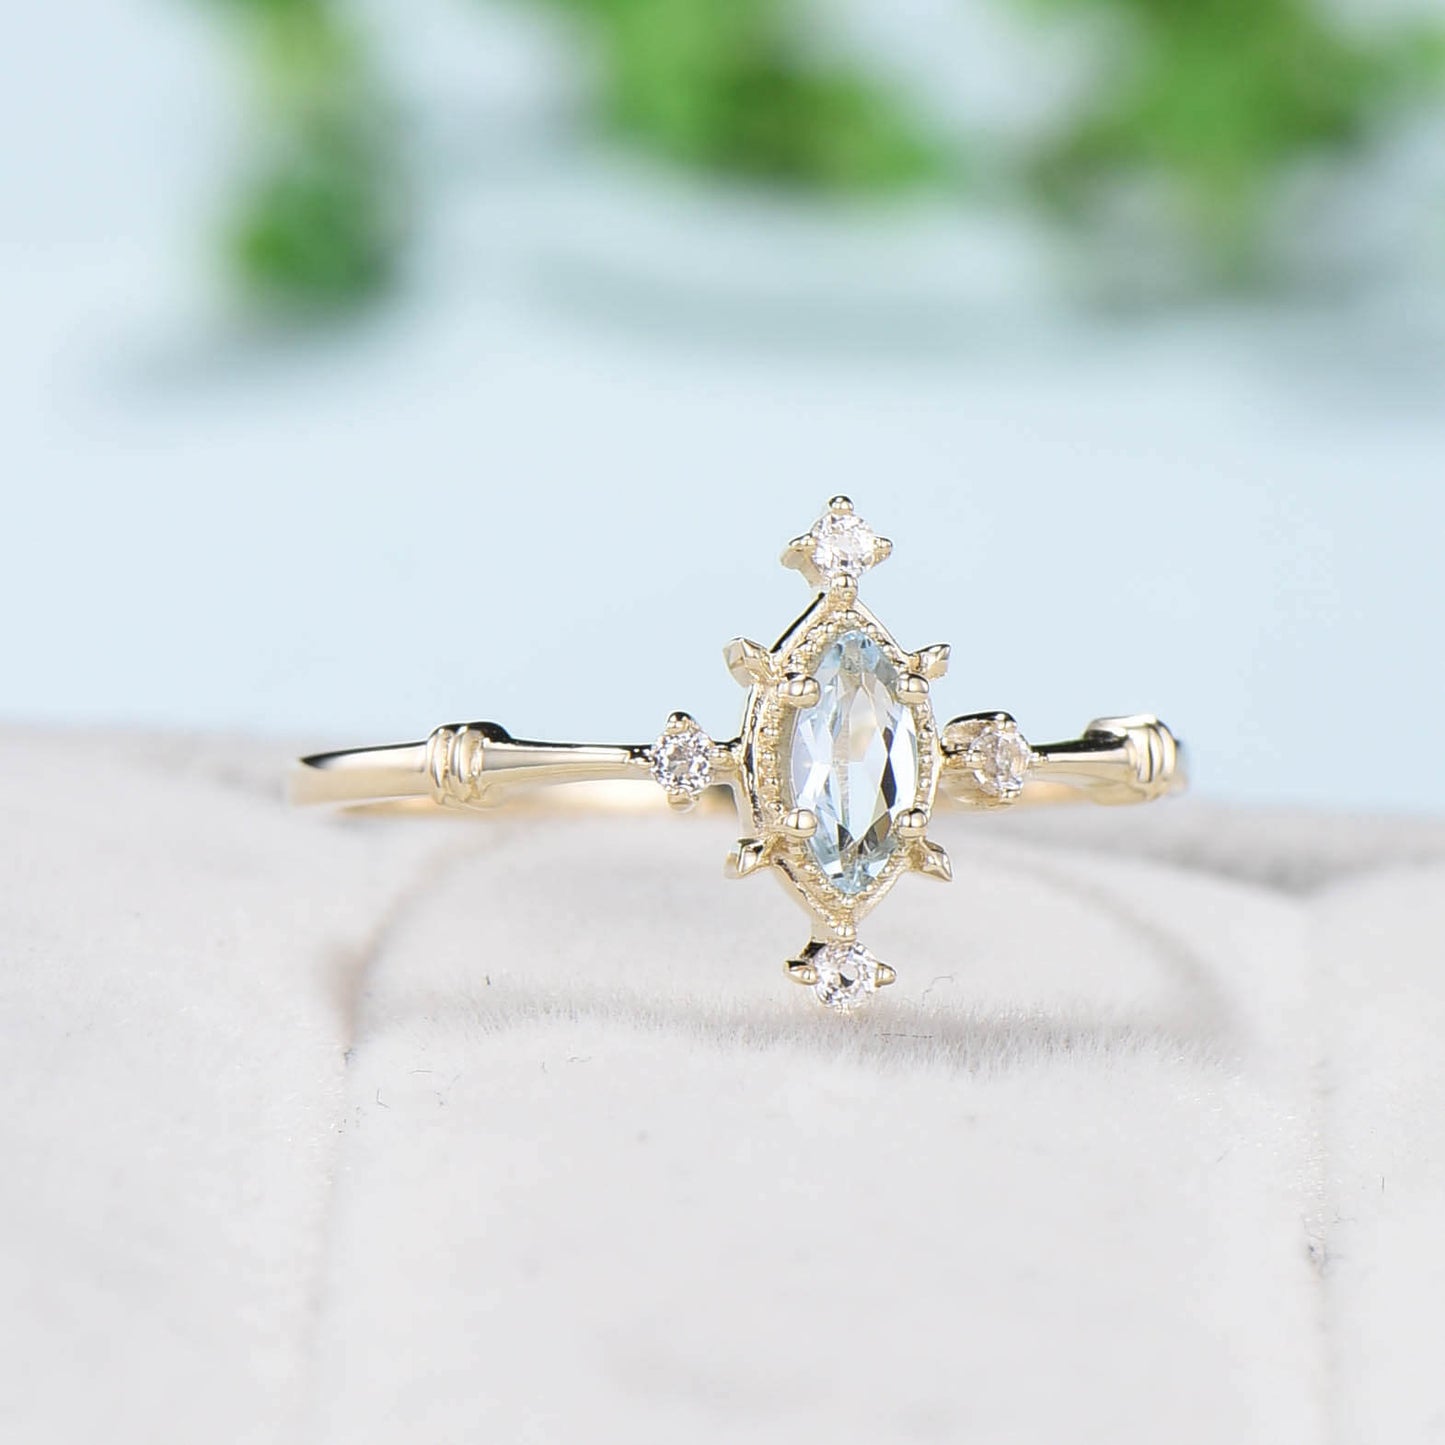 Minimalist Dainty Aquamarine Engagement Ring Gold Marquise Cut Star March Birthstone Wedding Ring Perfect Gift  for Daughter Christmas Gift - PENFINE